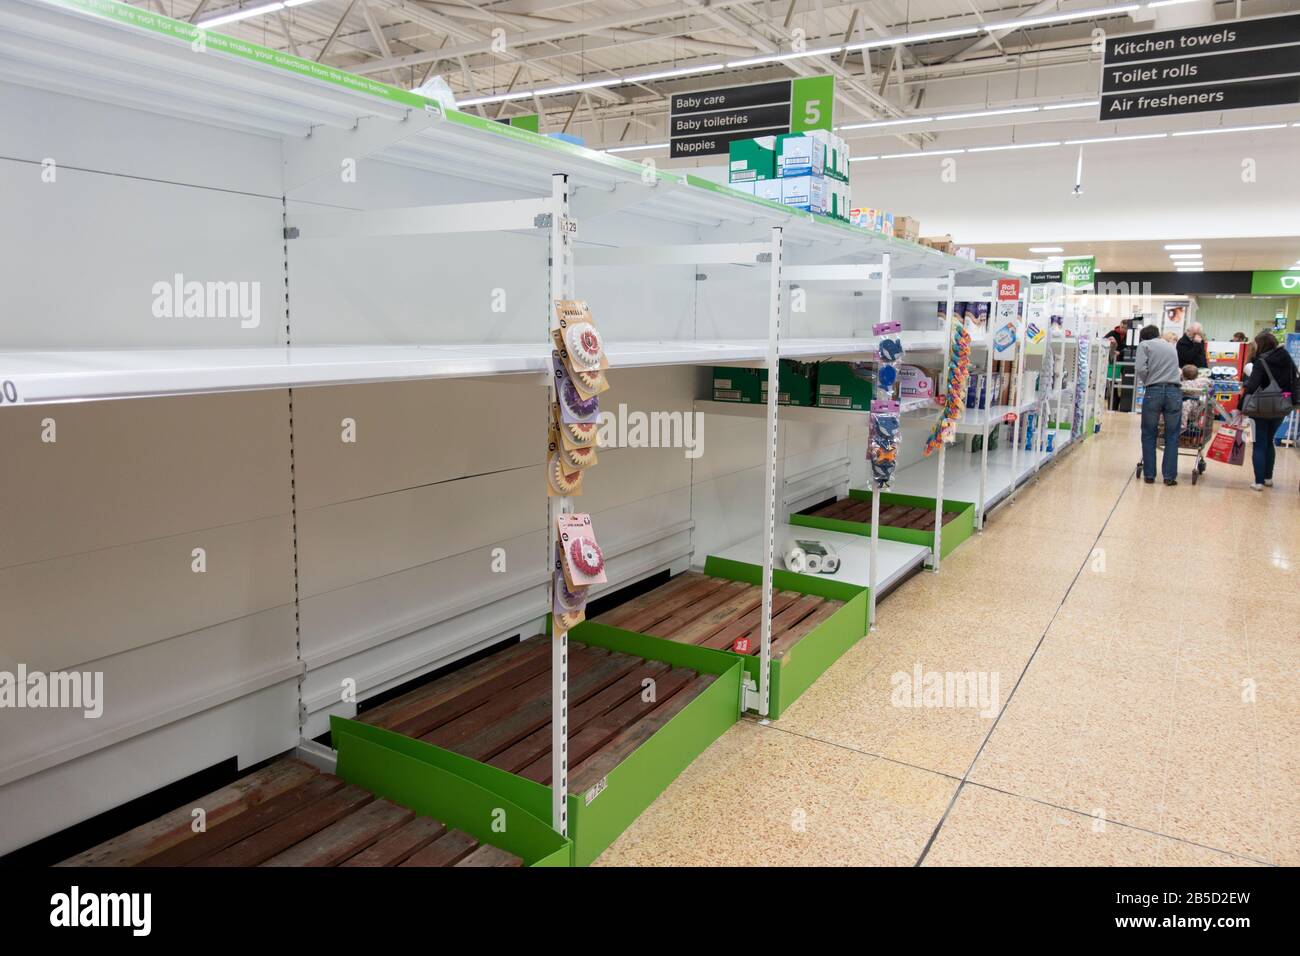 Edinburgh, Scotland, UK. 8 March, 2020.  Panic buying of packets of toilet tissue and liquid hand soaps leads to empty shelves at supermarkets in Edinburgh. Toilet rolls sold out at Asda store. Pictured; Iain Masterton/Alamy Live News Stock Photo